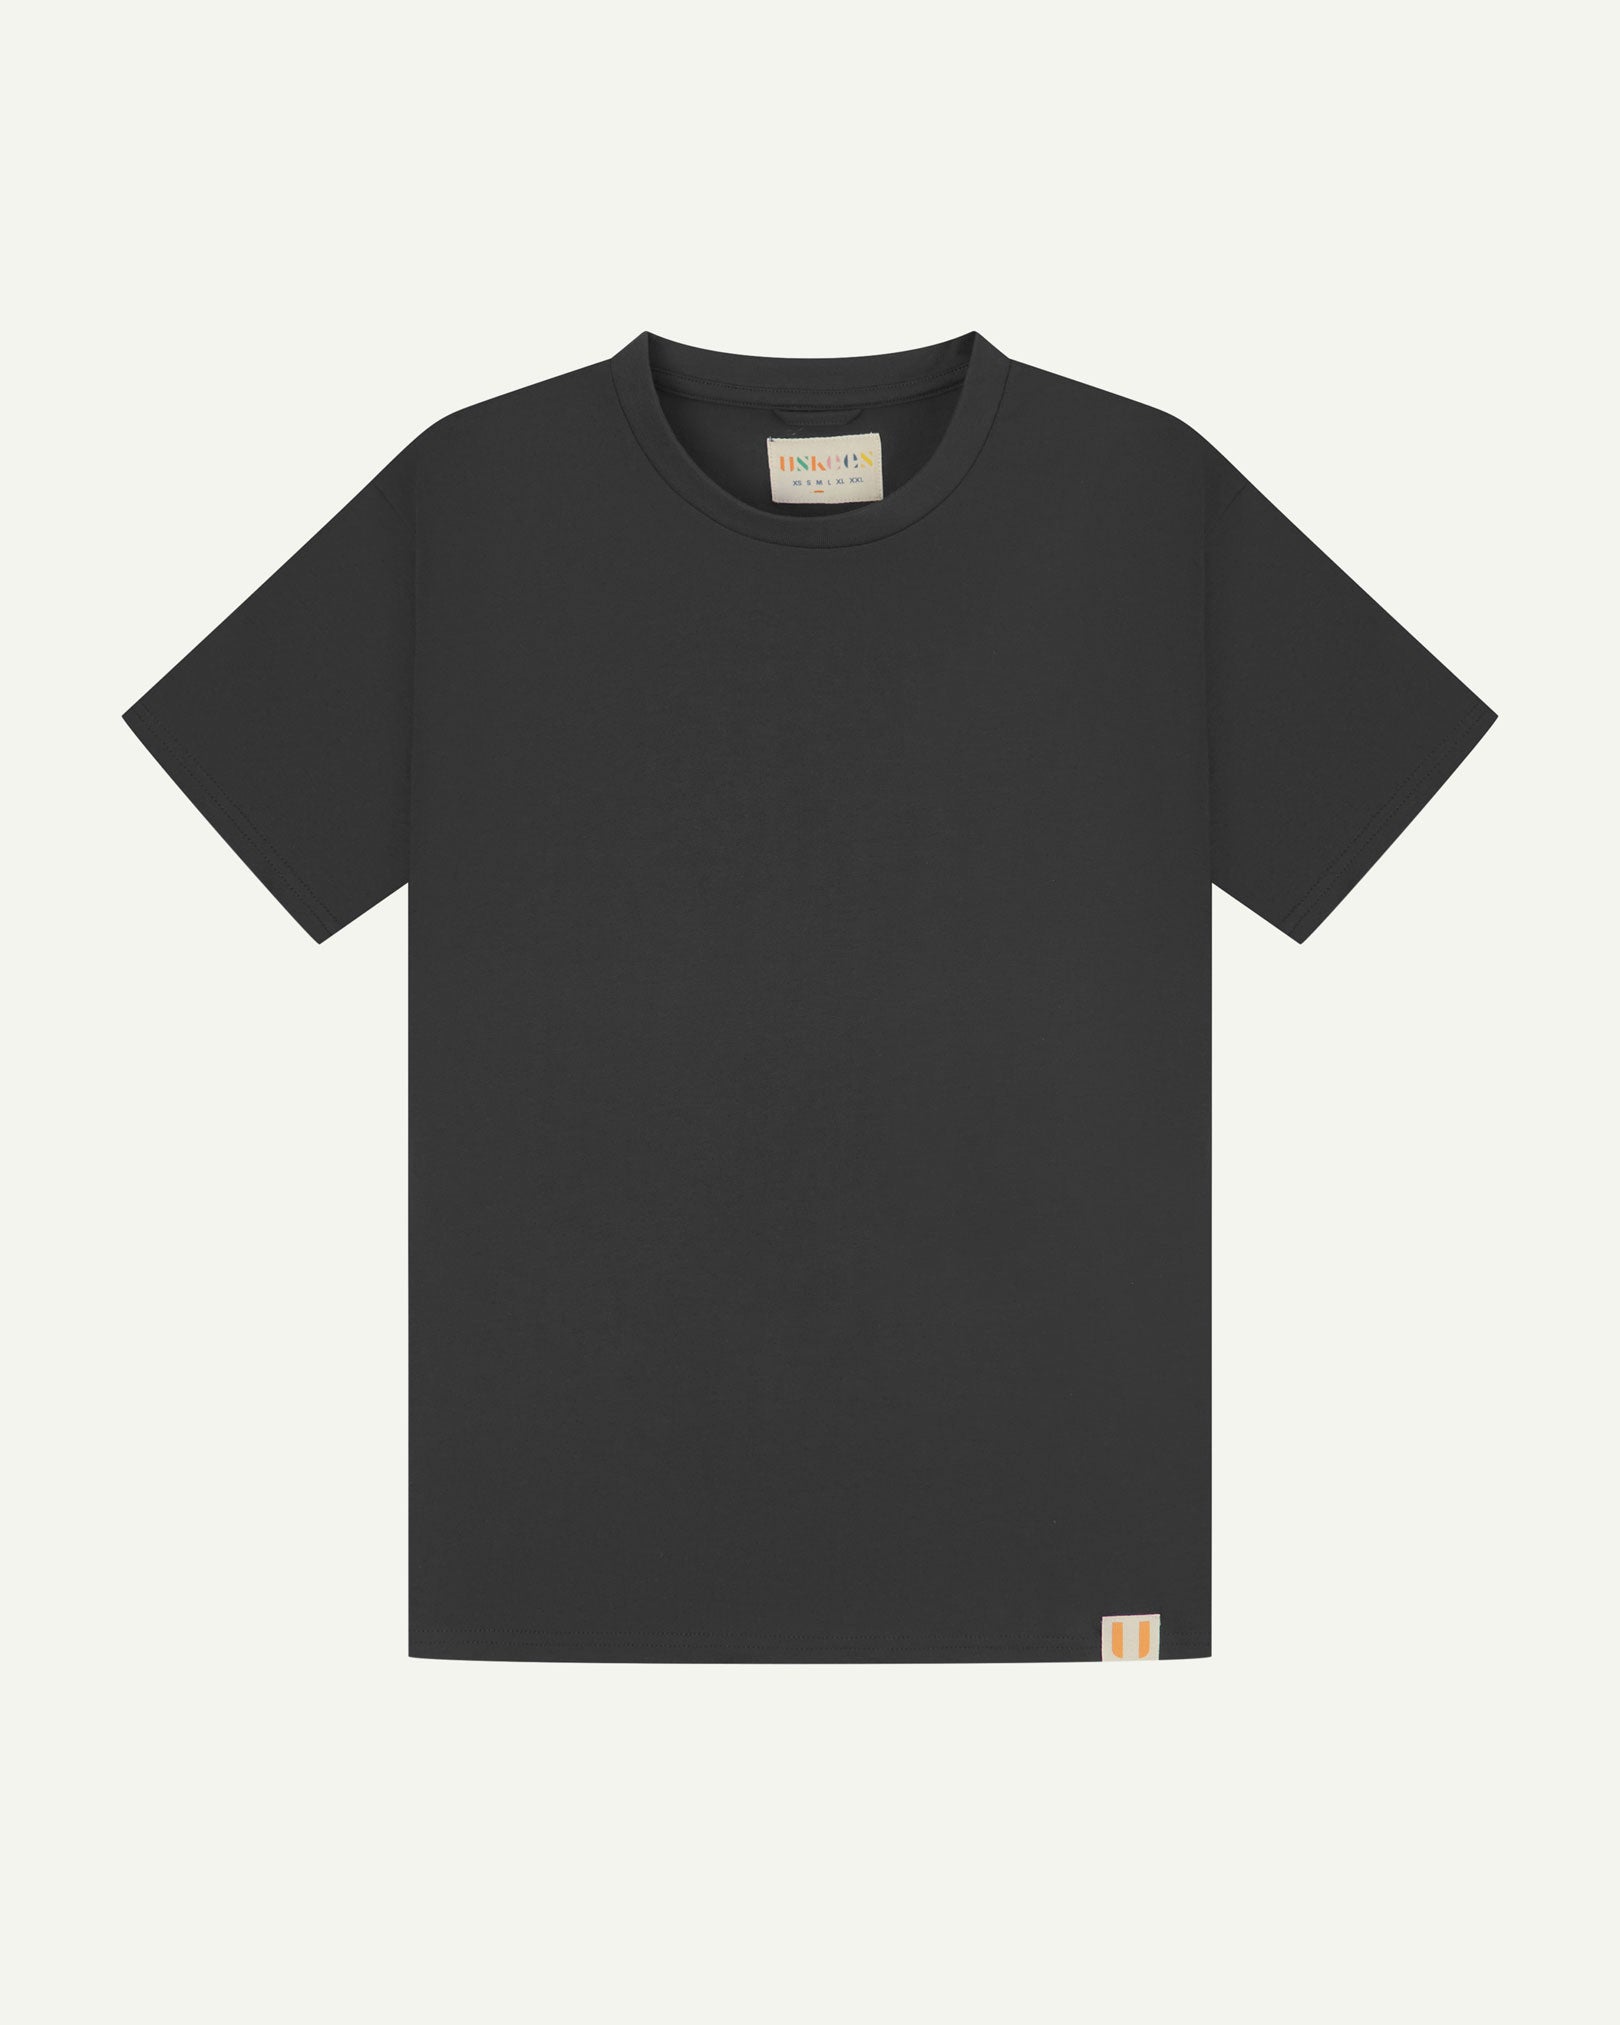 Full flat view of faded black organic cotton Uskees T-shirt for men.